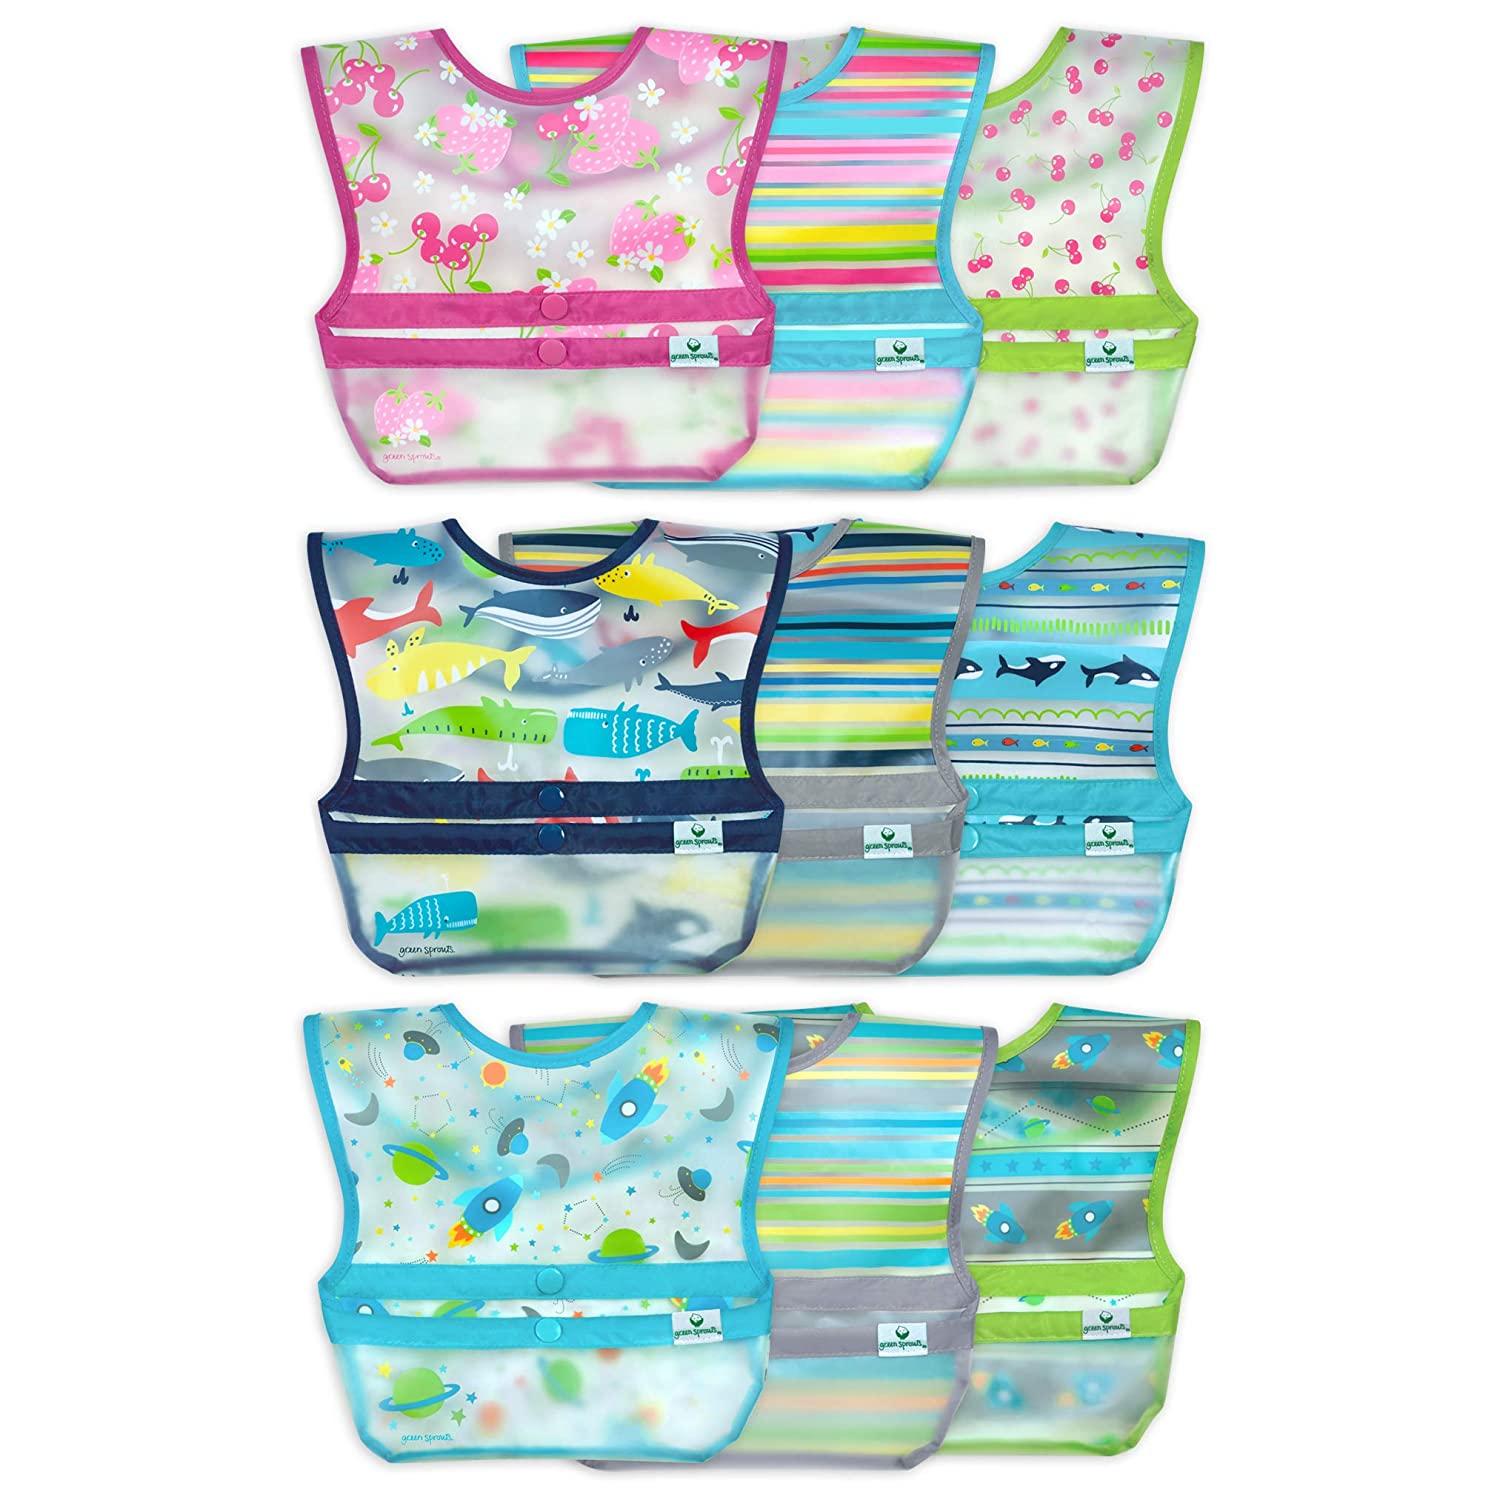 green sprouts® Snap + Go® Easy-wear Bibs (3 pack)